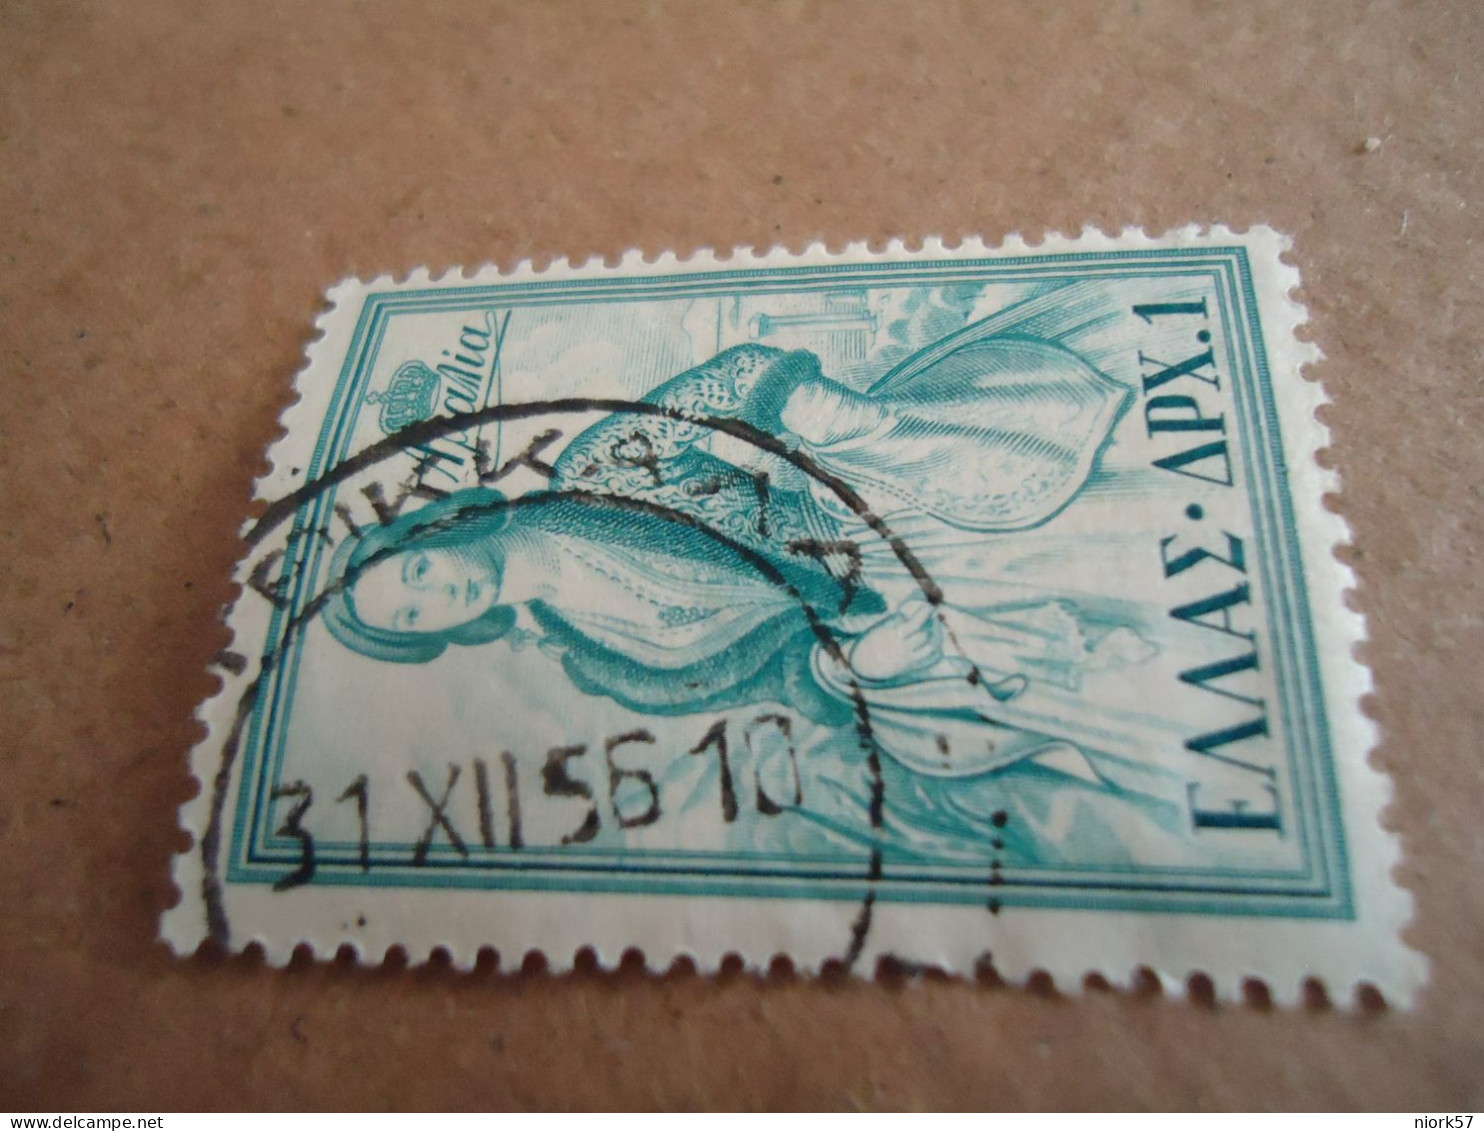 GREECE   POSTMARK ON STAMPS   ΤΡΙΚΚΑΛΑ 1956 - Marcophilie - EMA (Empreintes Machines)